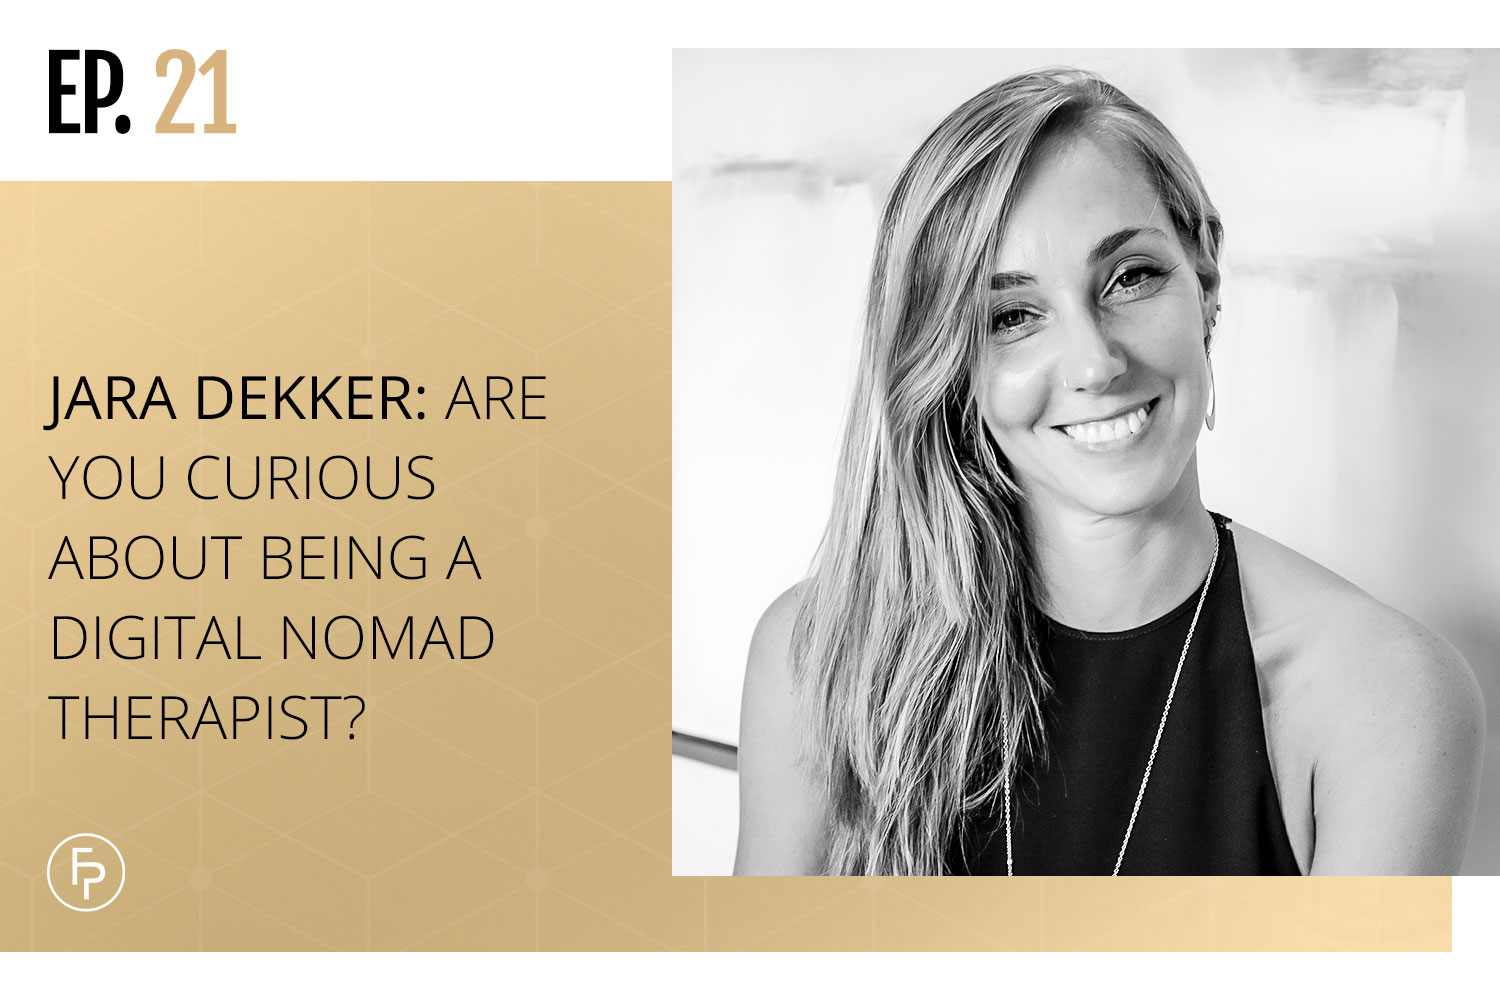 Jara Dekker: Are You Curious About Being a Digital Nomad Therapist? | EP 21